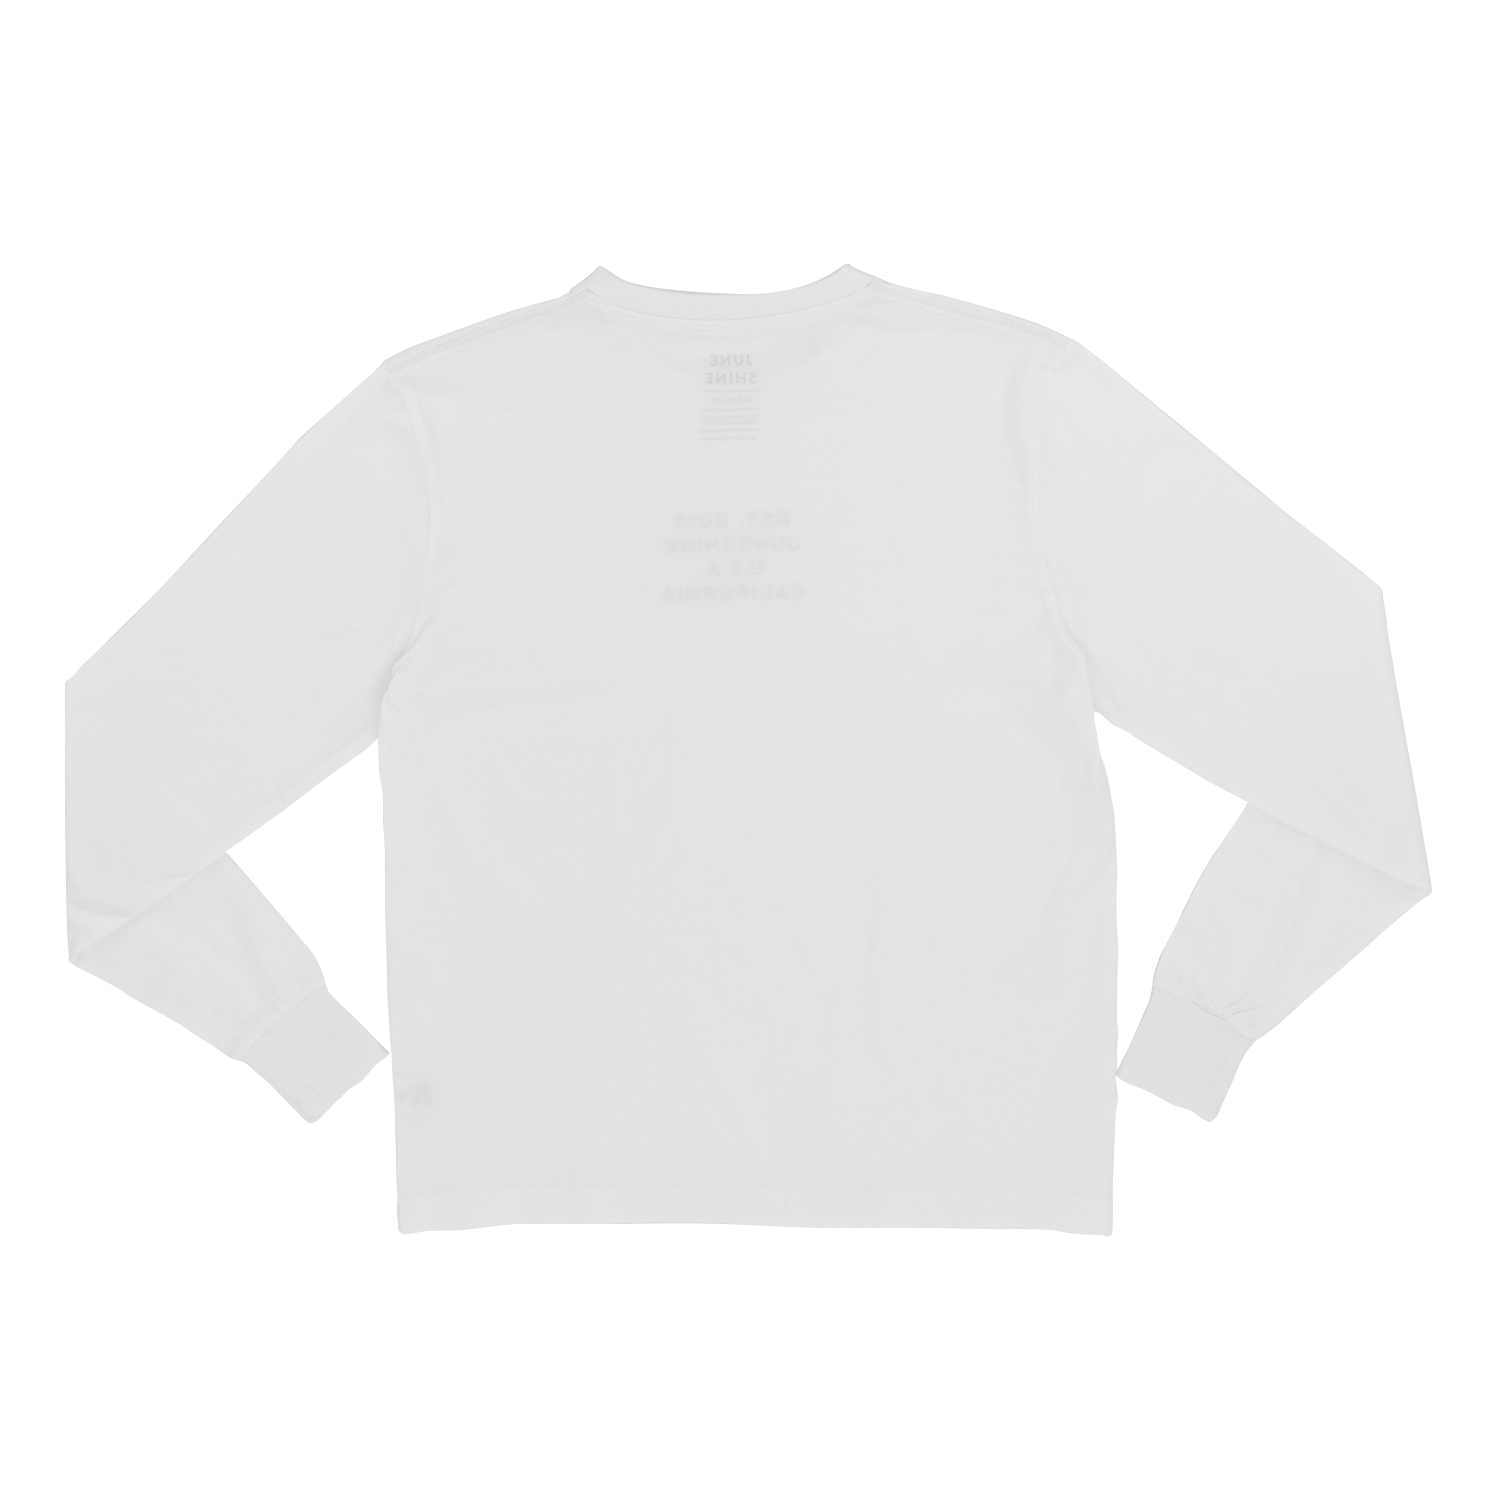 Back view of white long sleeve shirt.